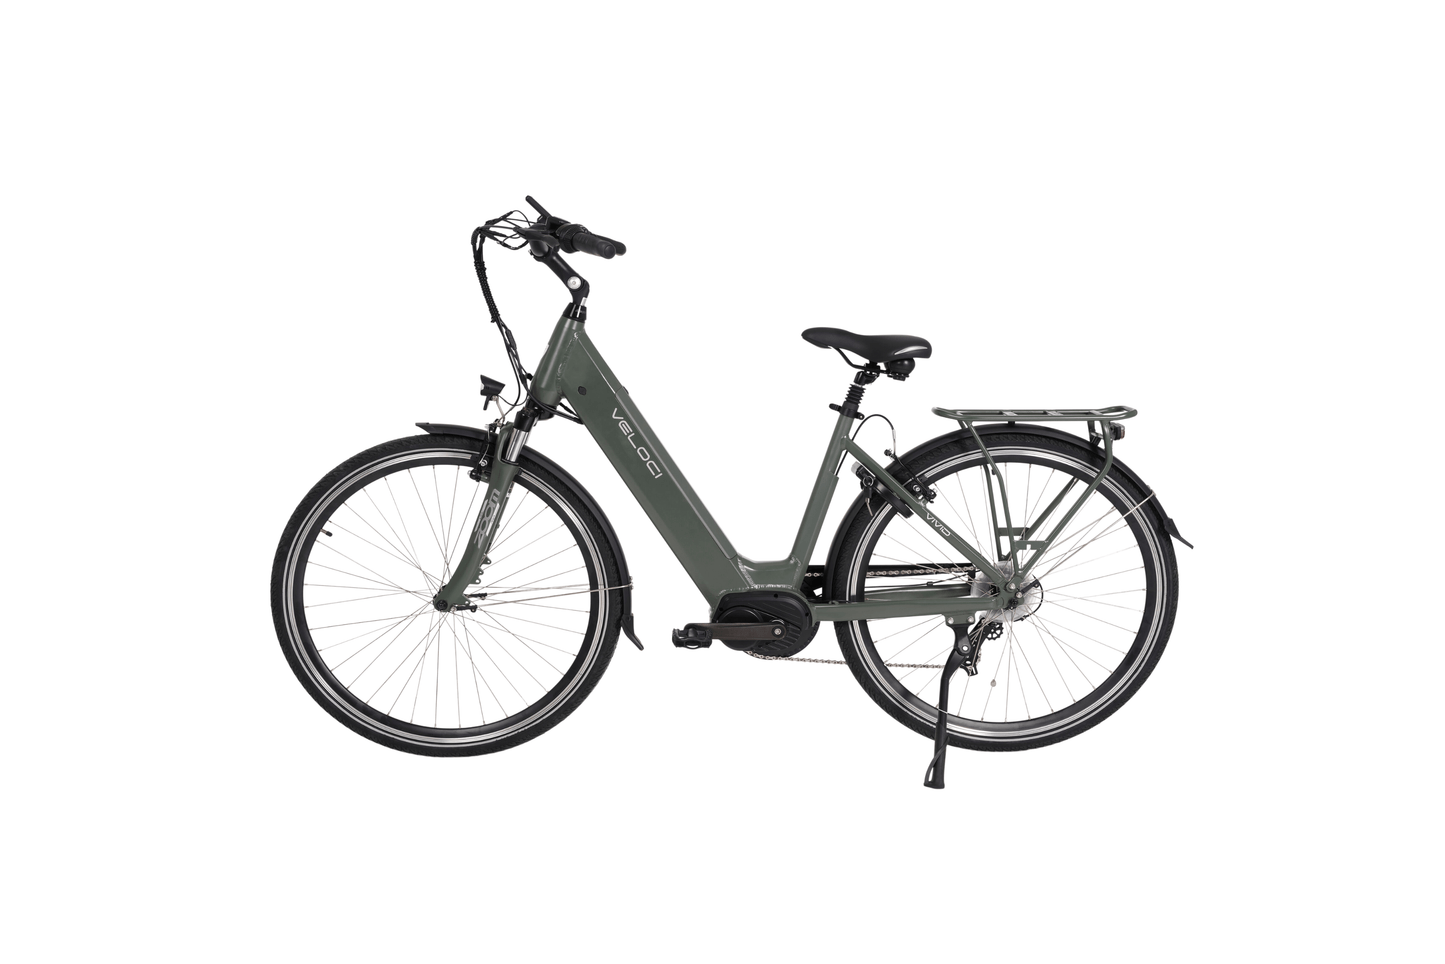 Veloci Vivid electric bike in the colour "Crater Grey" available from Veloci e-bike retailer.